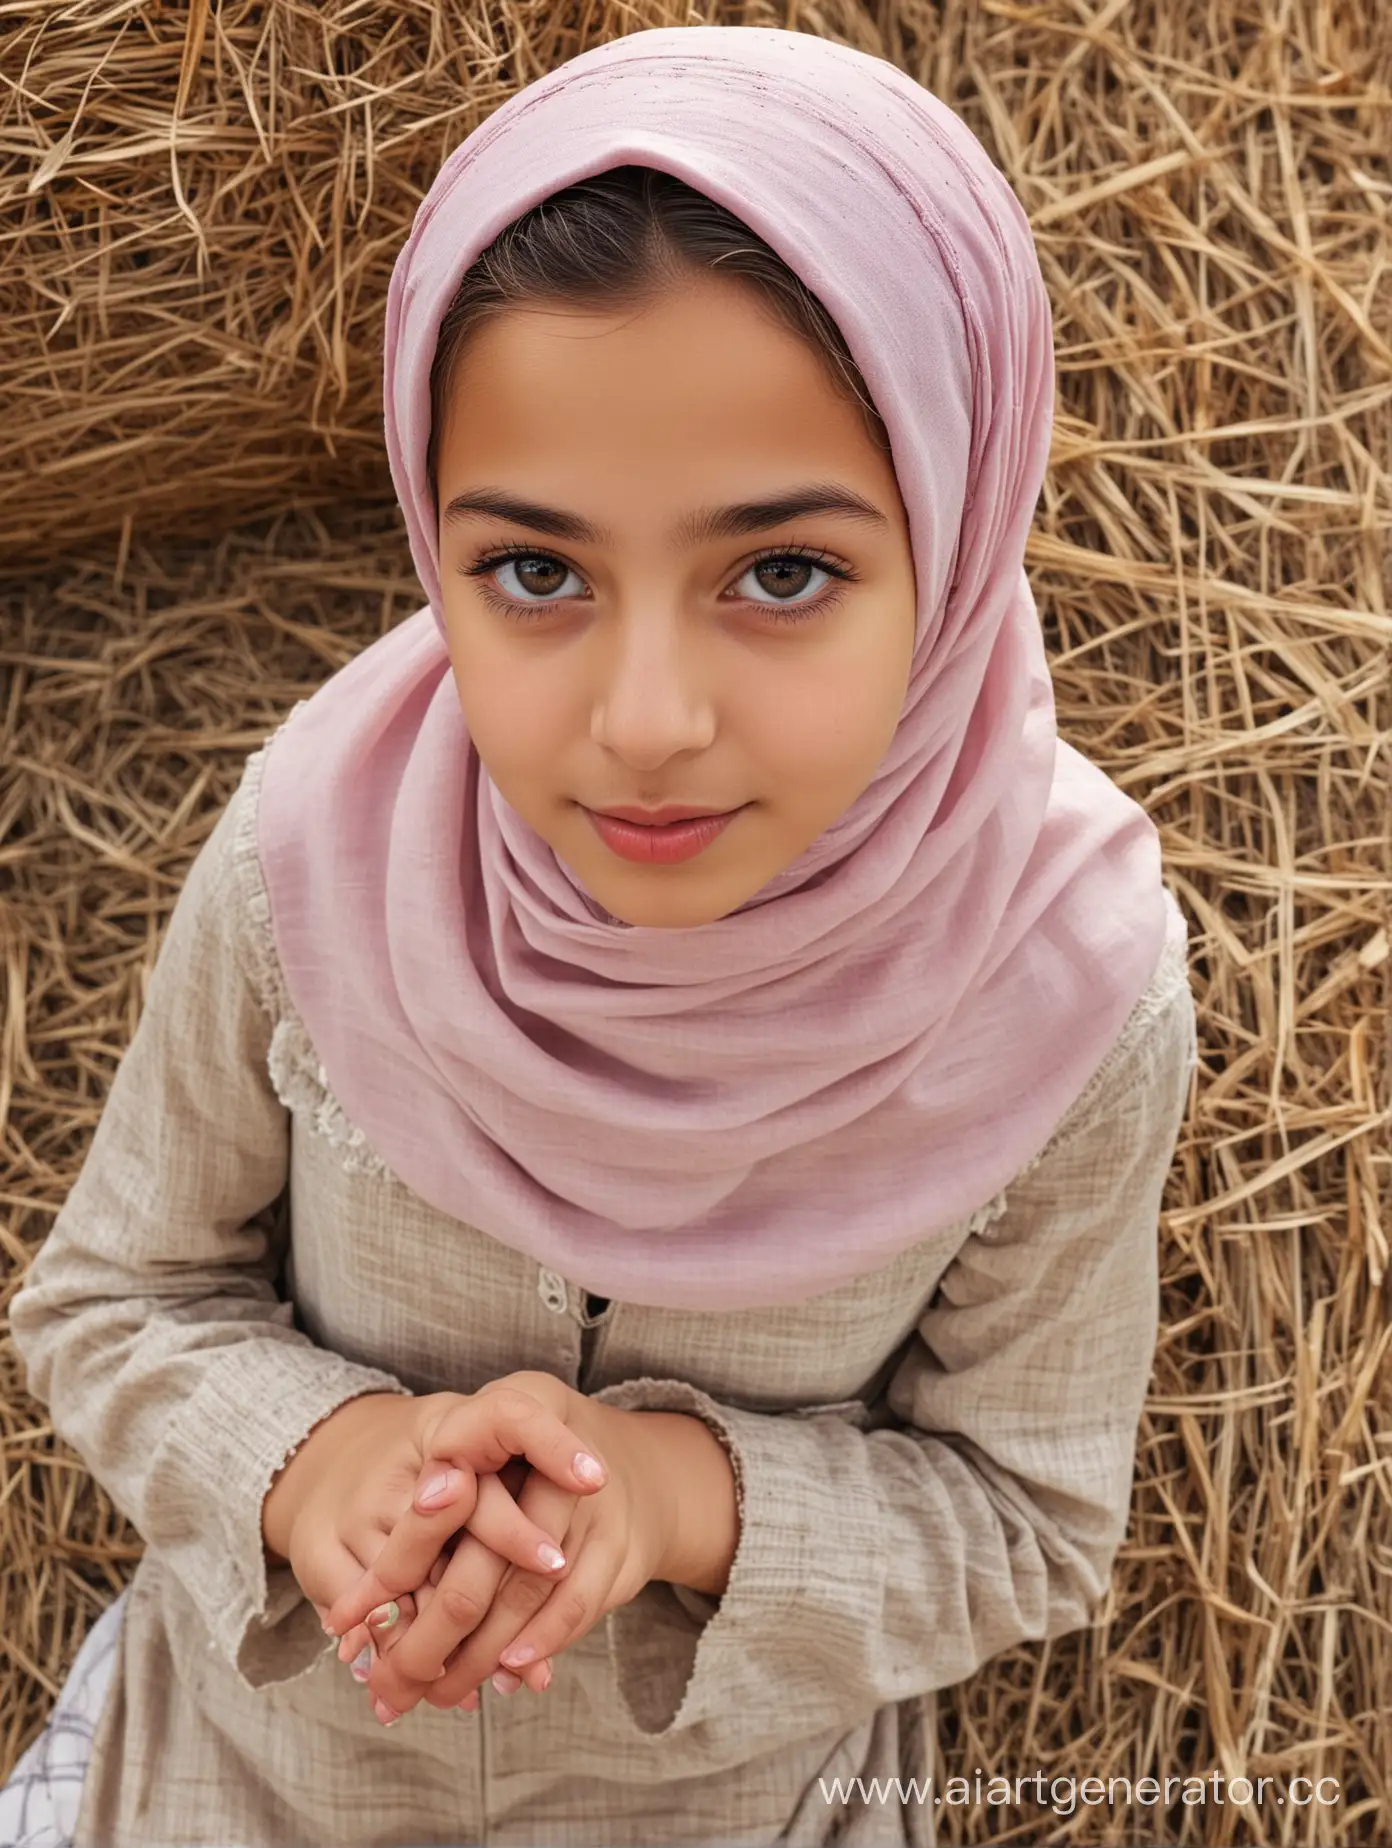 Young-Turkish-Girl-in-Traditional-Attire-Offering-a-Warm-Welcome